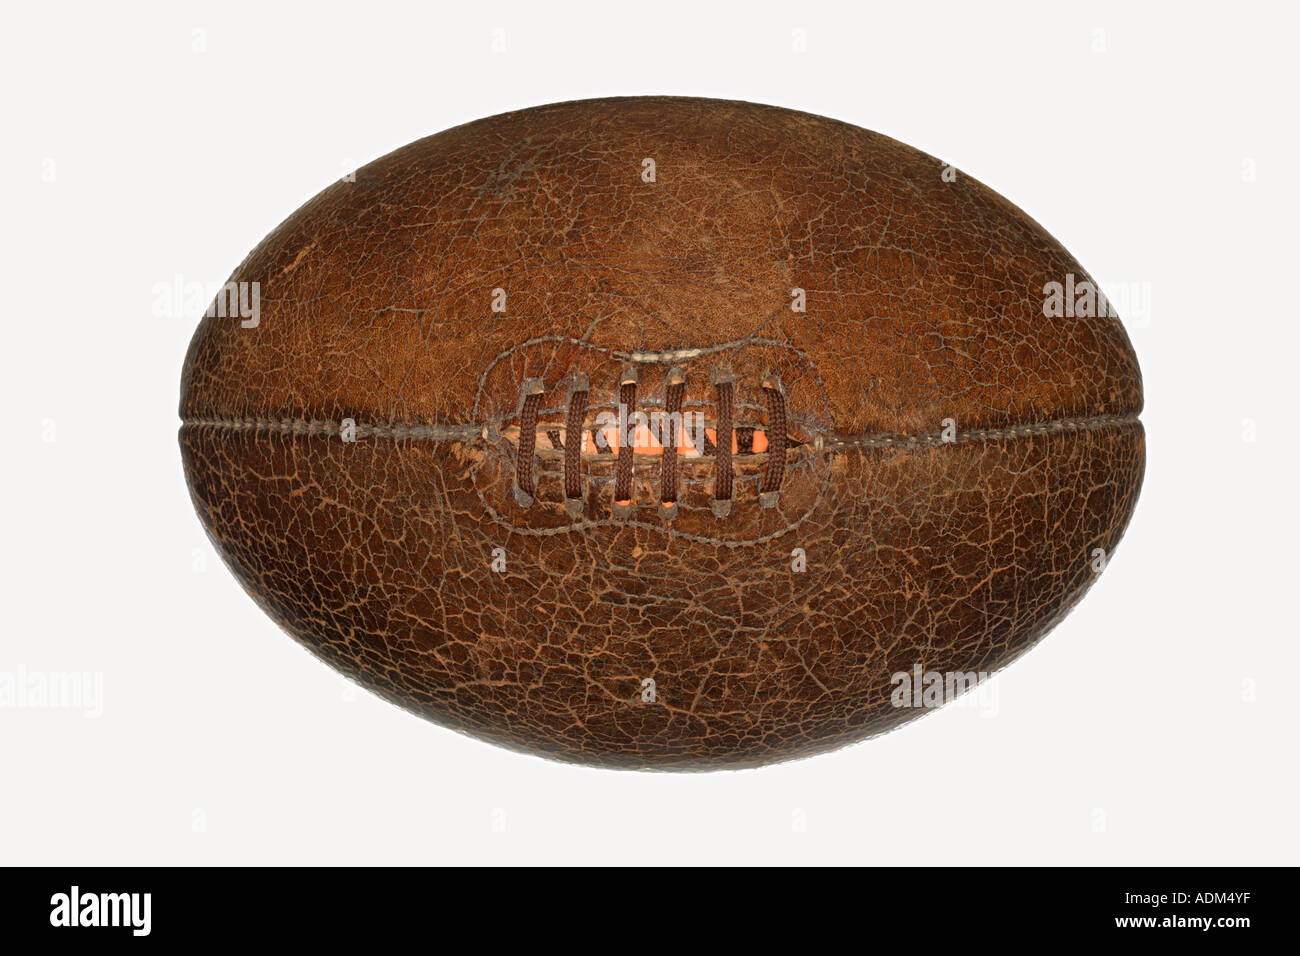 Old rugby ball Stock Photo